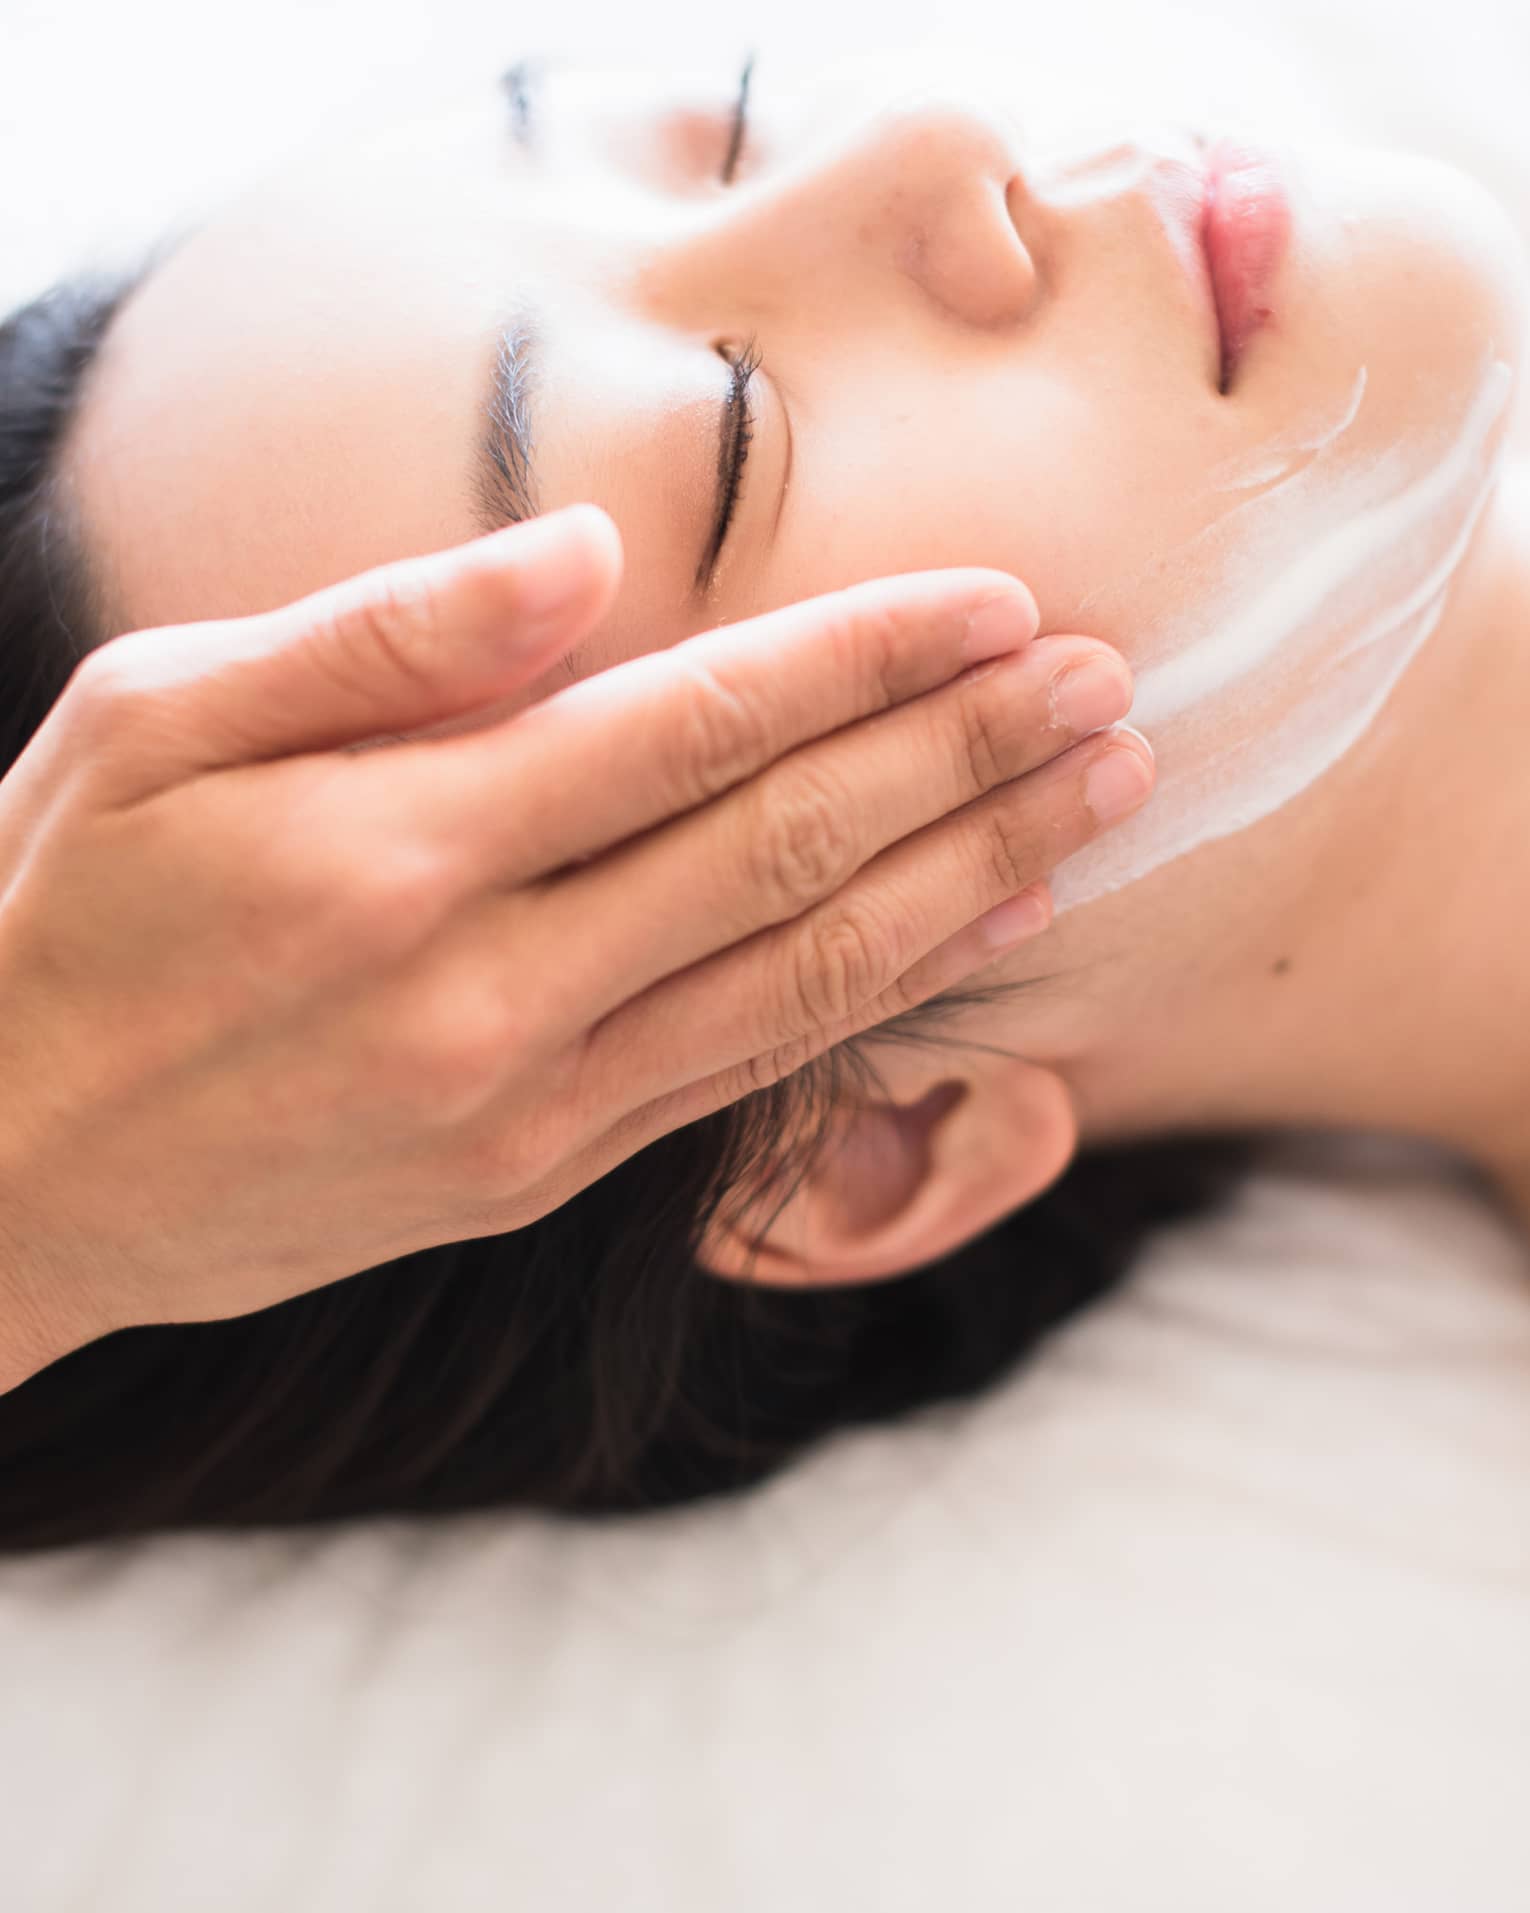 Close-up of spa attendant's hands rubbing white cream on woman's face as she lies on massage table